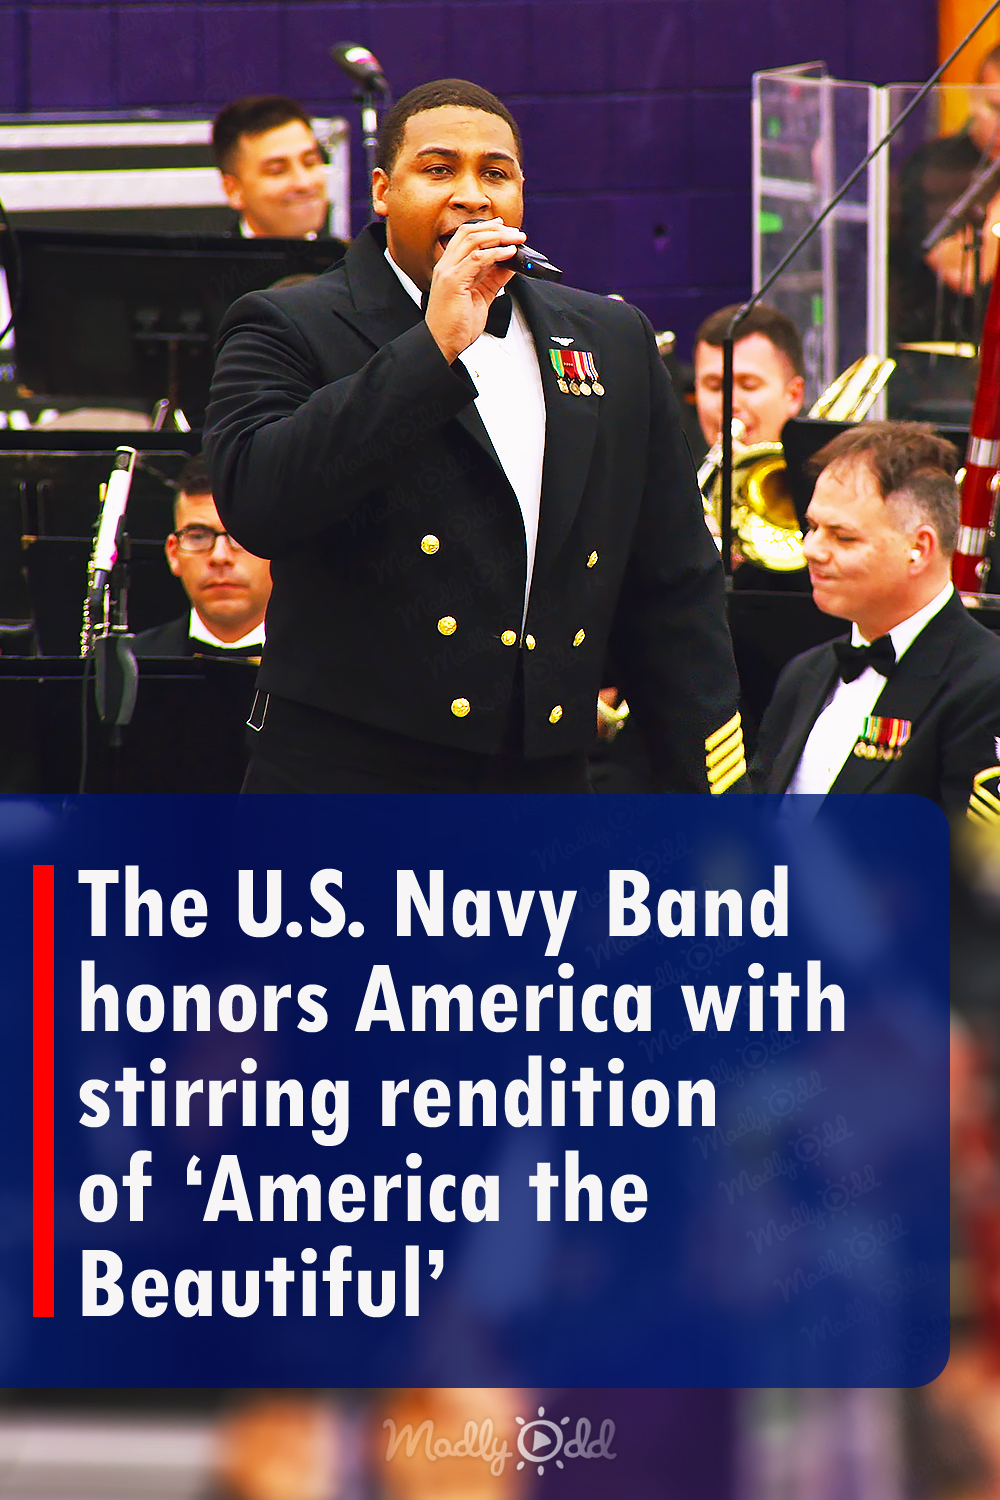 The U.S. Navy Band honors America with stirring rendition of ‘America the Beautiful’